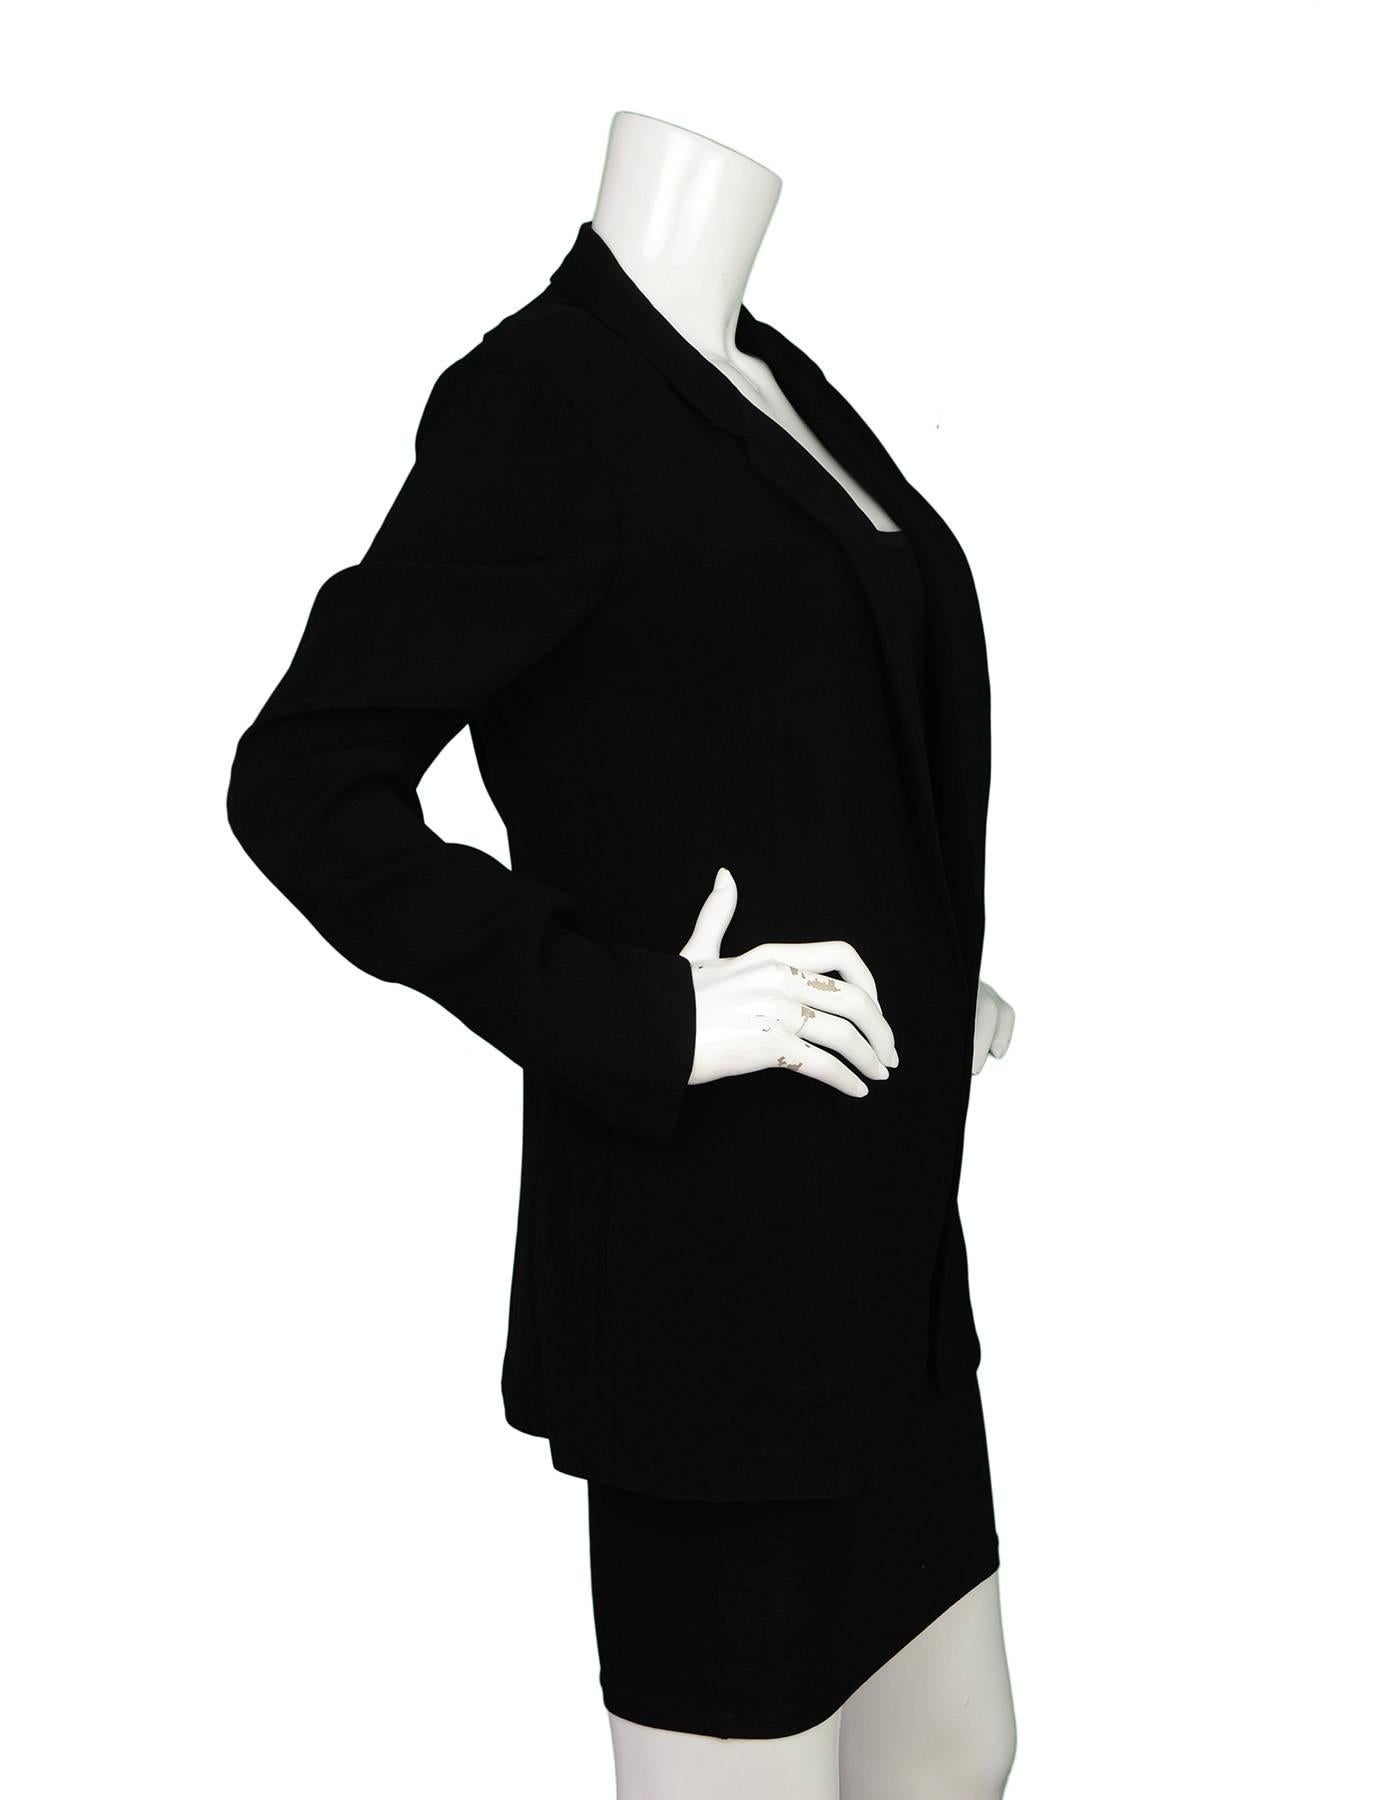 Joseph Black Open Blazer

Made In: France
Color: Black
Composition: 72% acetate, 28% viscose
Lining: None
Closure/Opening: None
Exterior Pockets: Two hip slit pockets
Interior Pockets: None
Overall Condition: Excellent pre-owned condition
Marked